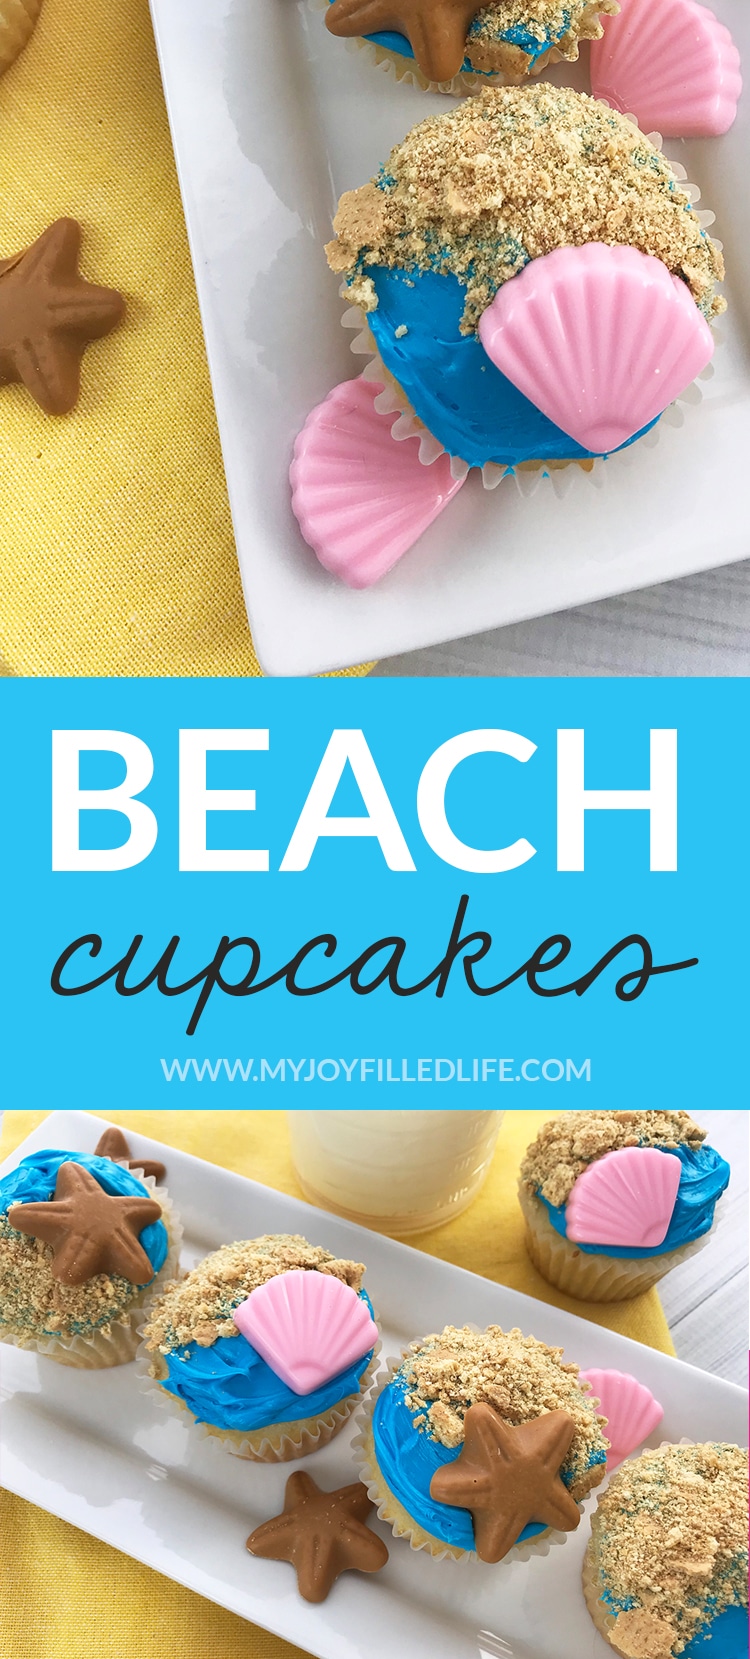 These beach cupcakes are the perfect fun treat for summer parties or play dates! You'll love these sweet and delicious beach cupcakes and your kids will love how fun they are to make and eat. #cupcakes #summertreat #thebeach